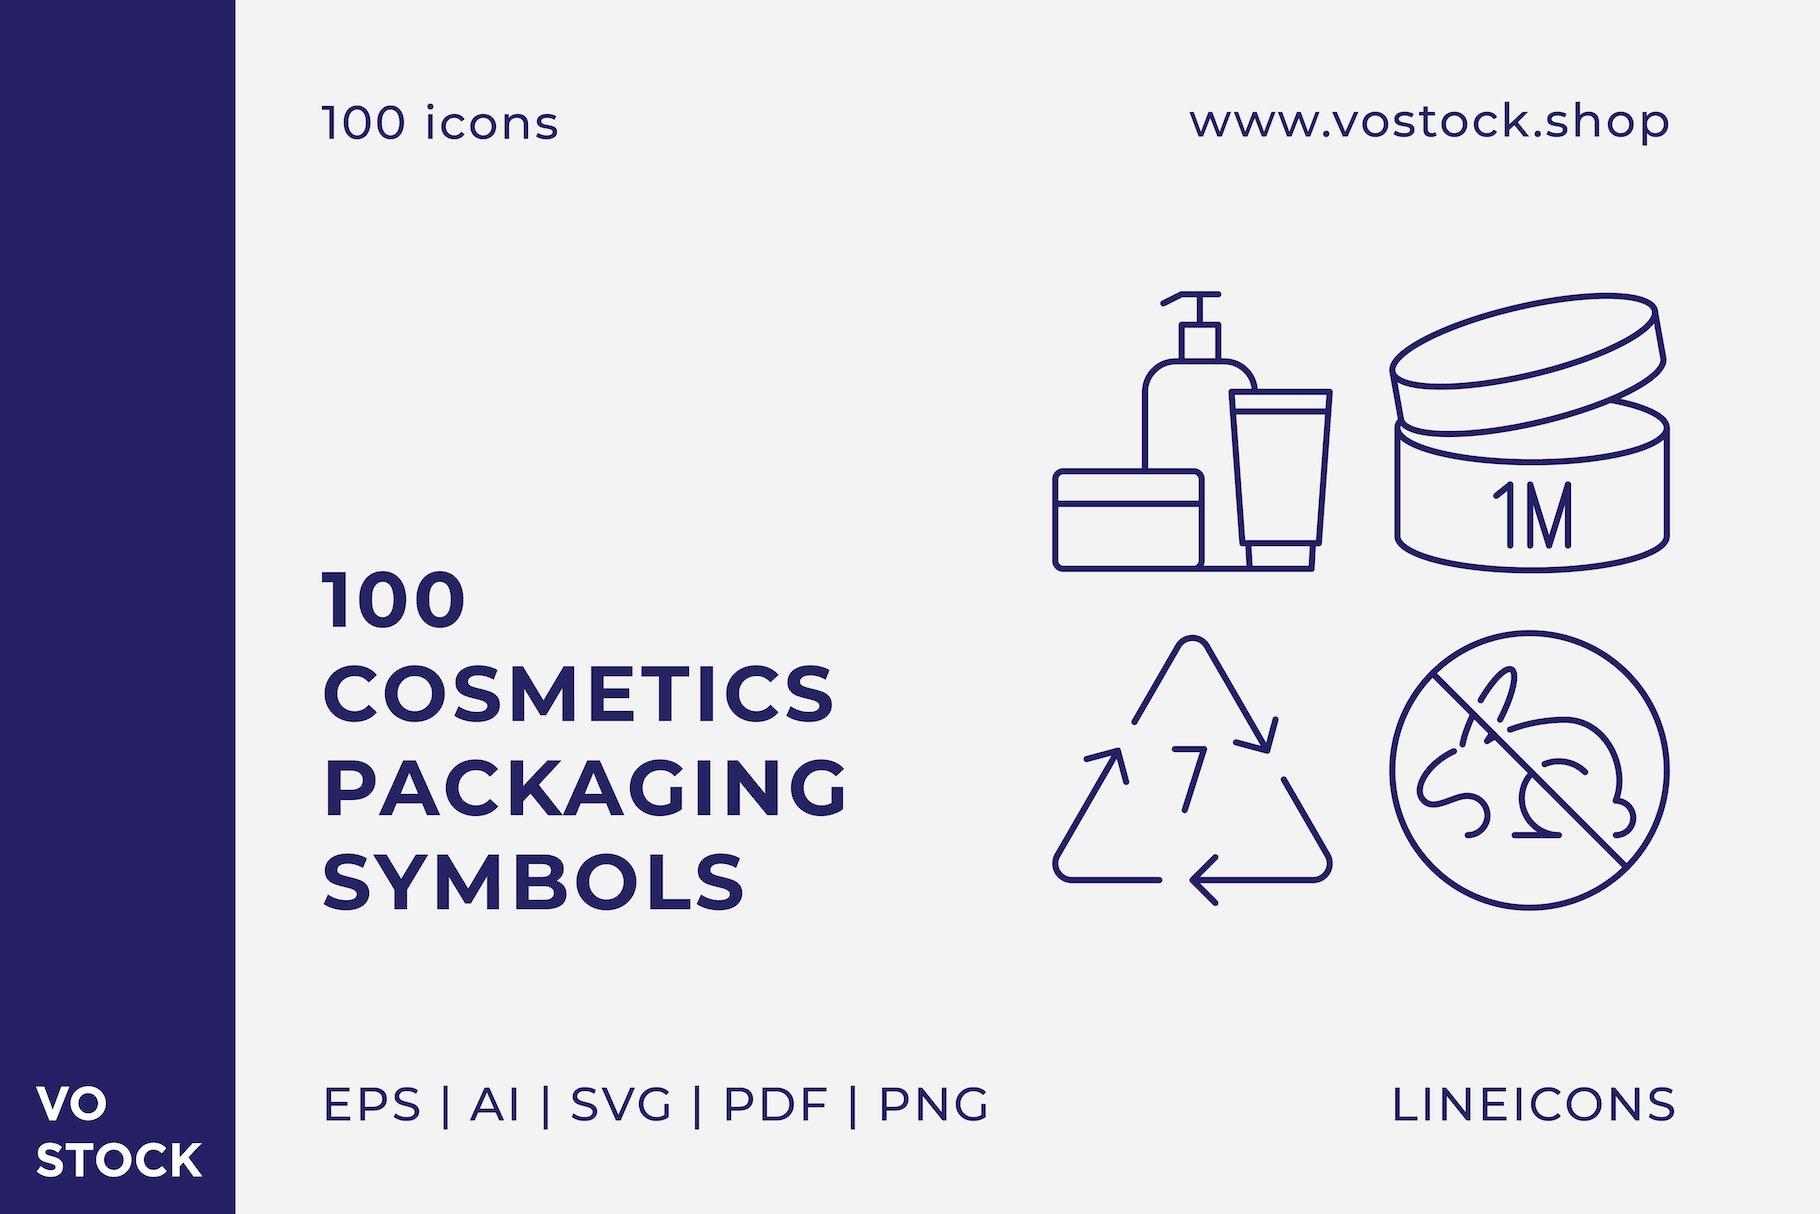 100 Cosmetics Packaging Icons cover image.